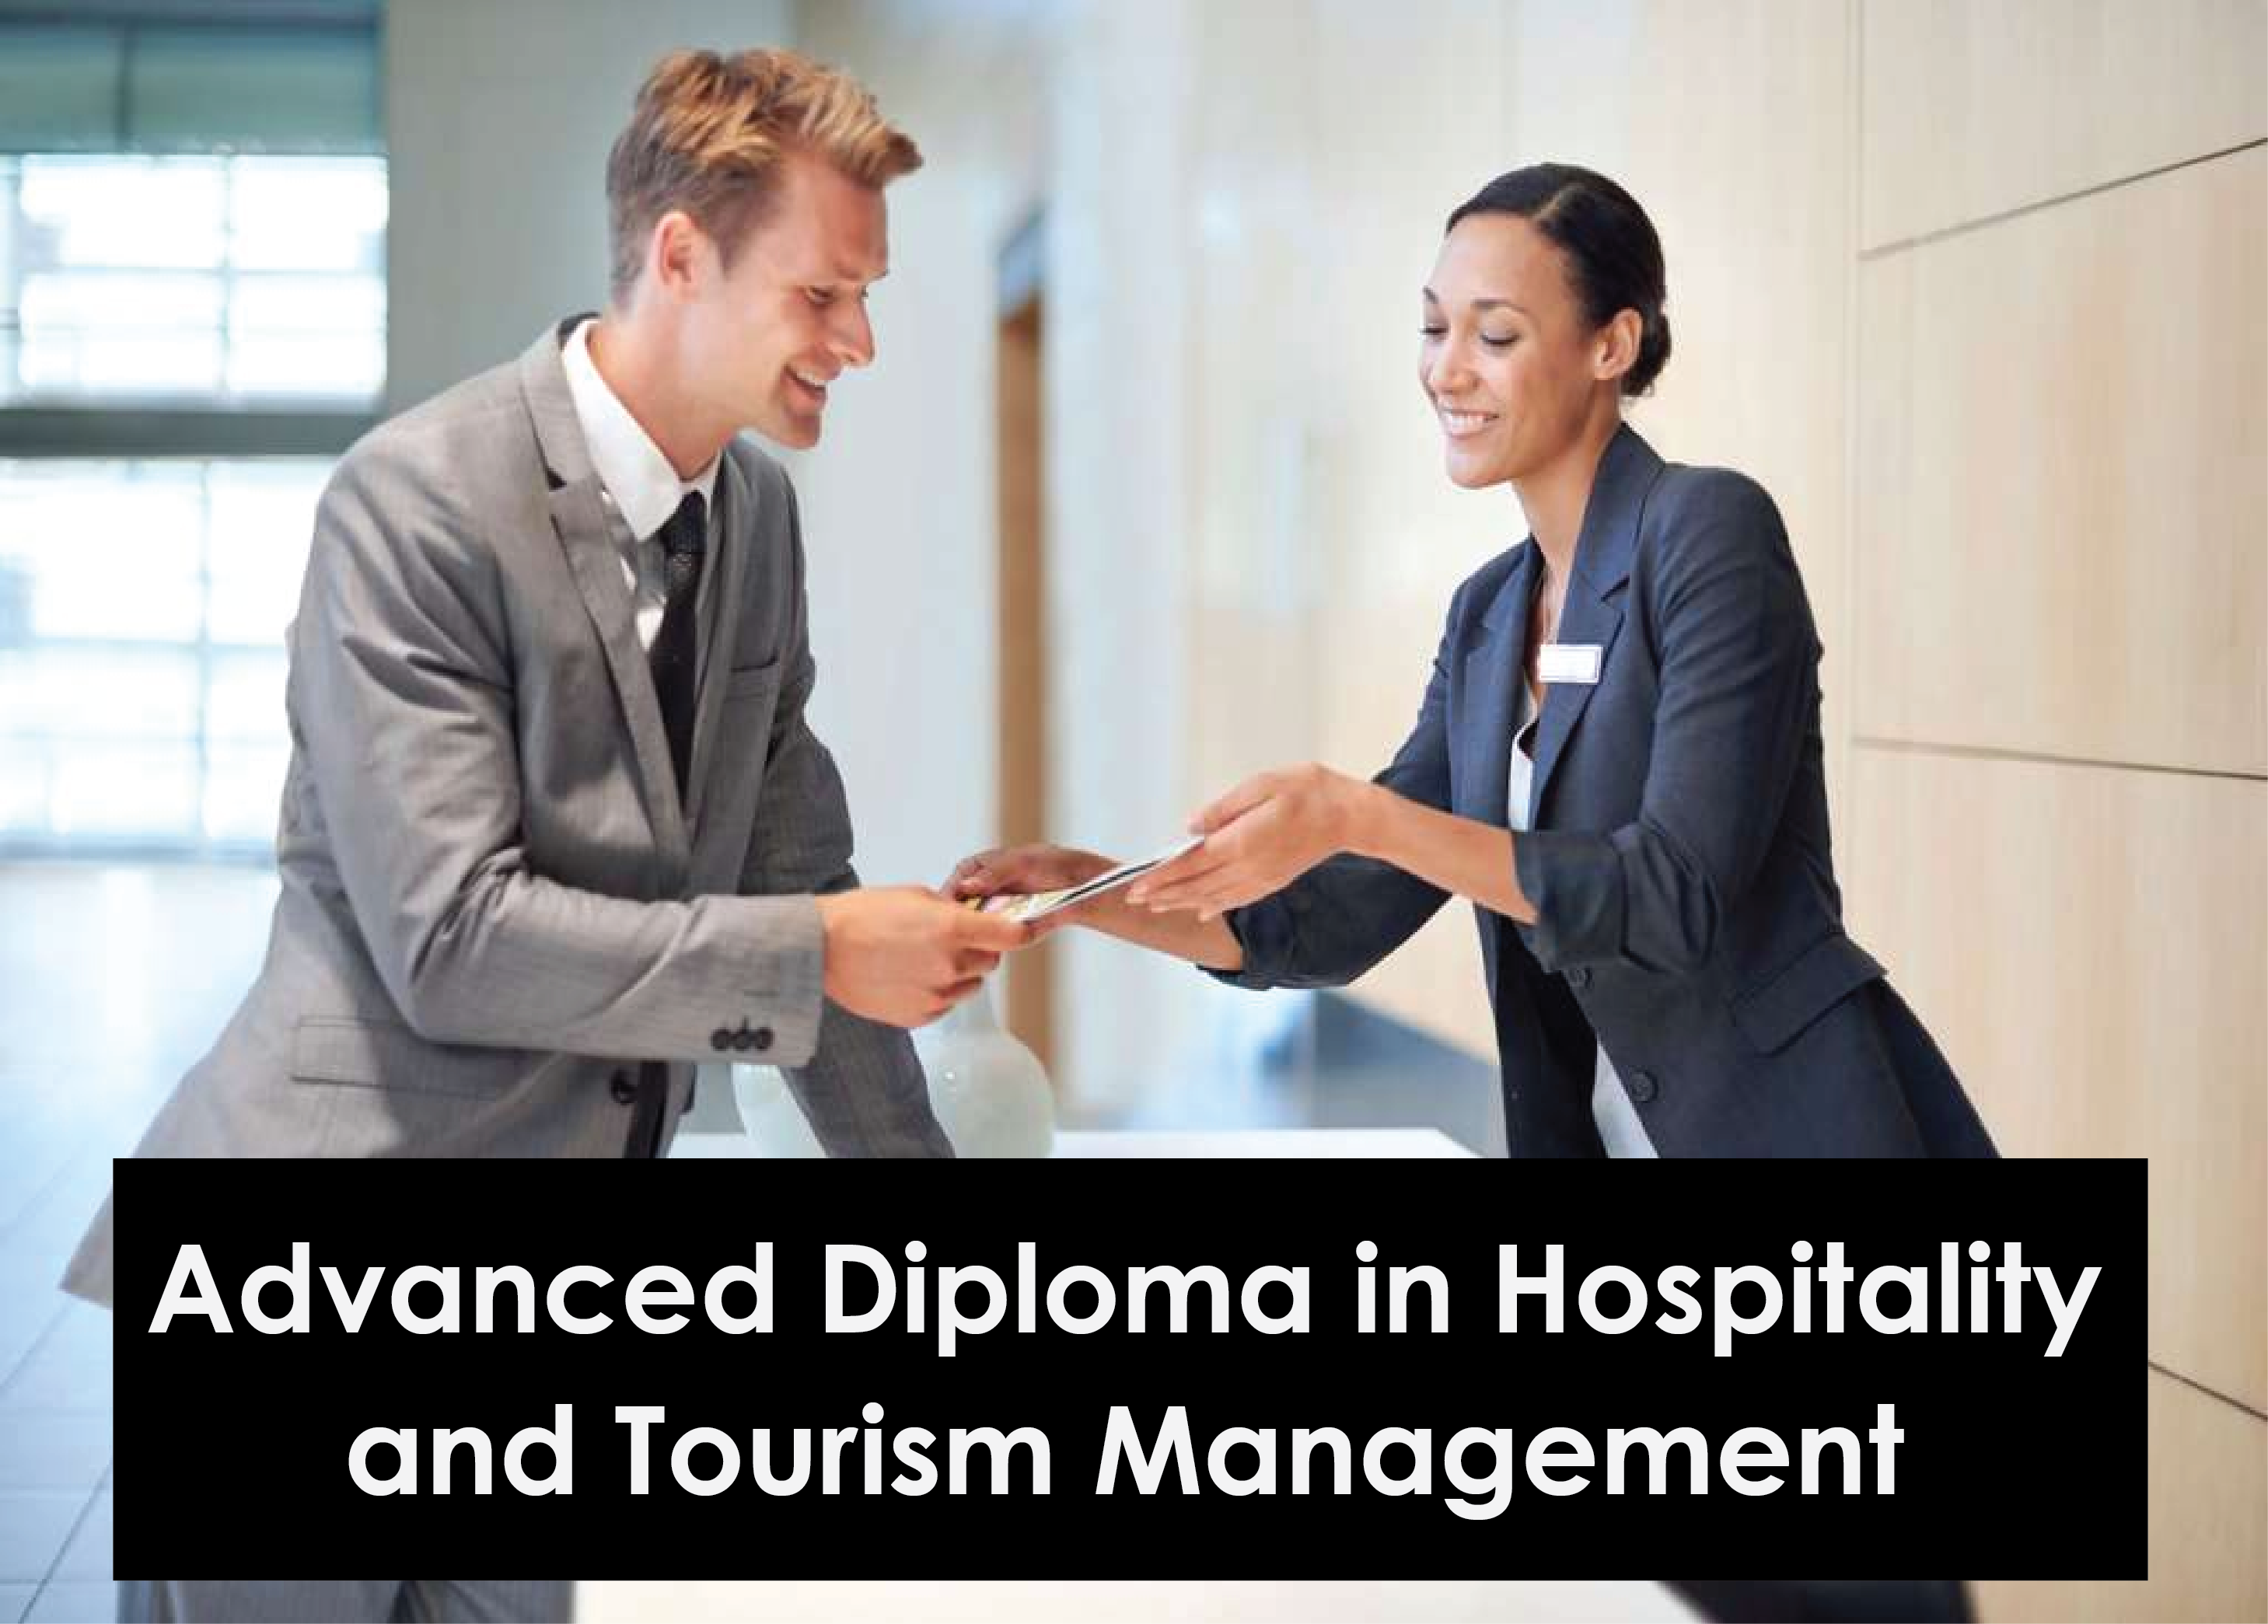 hospitality and tourism management course in uk